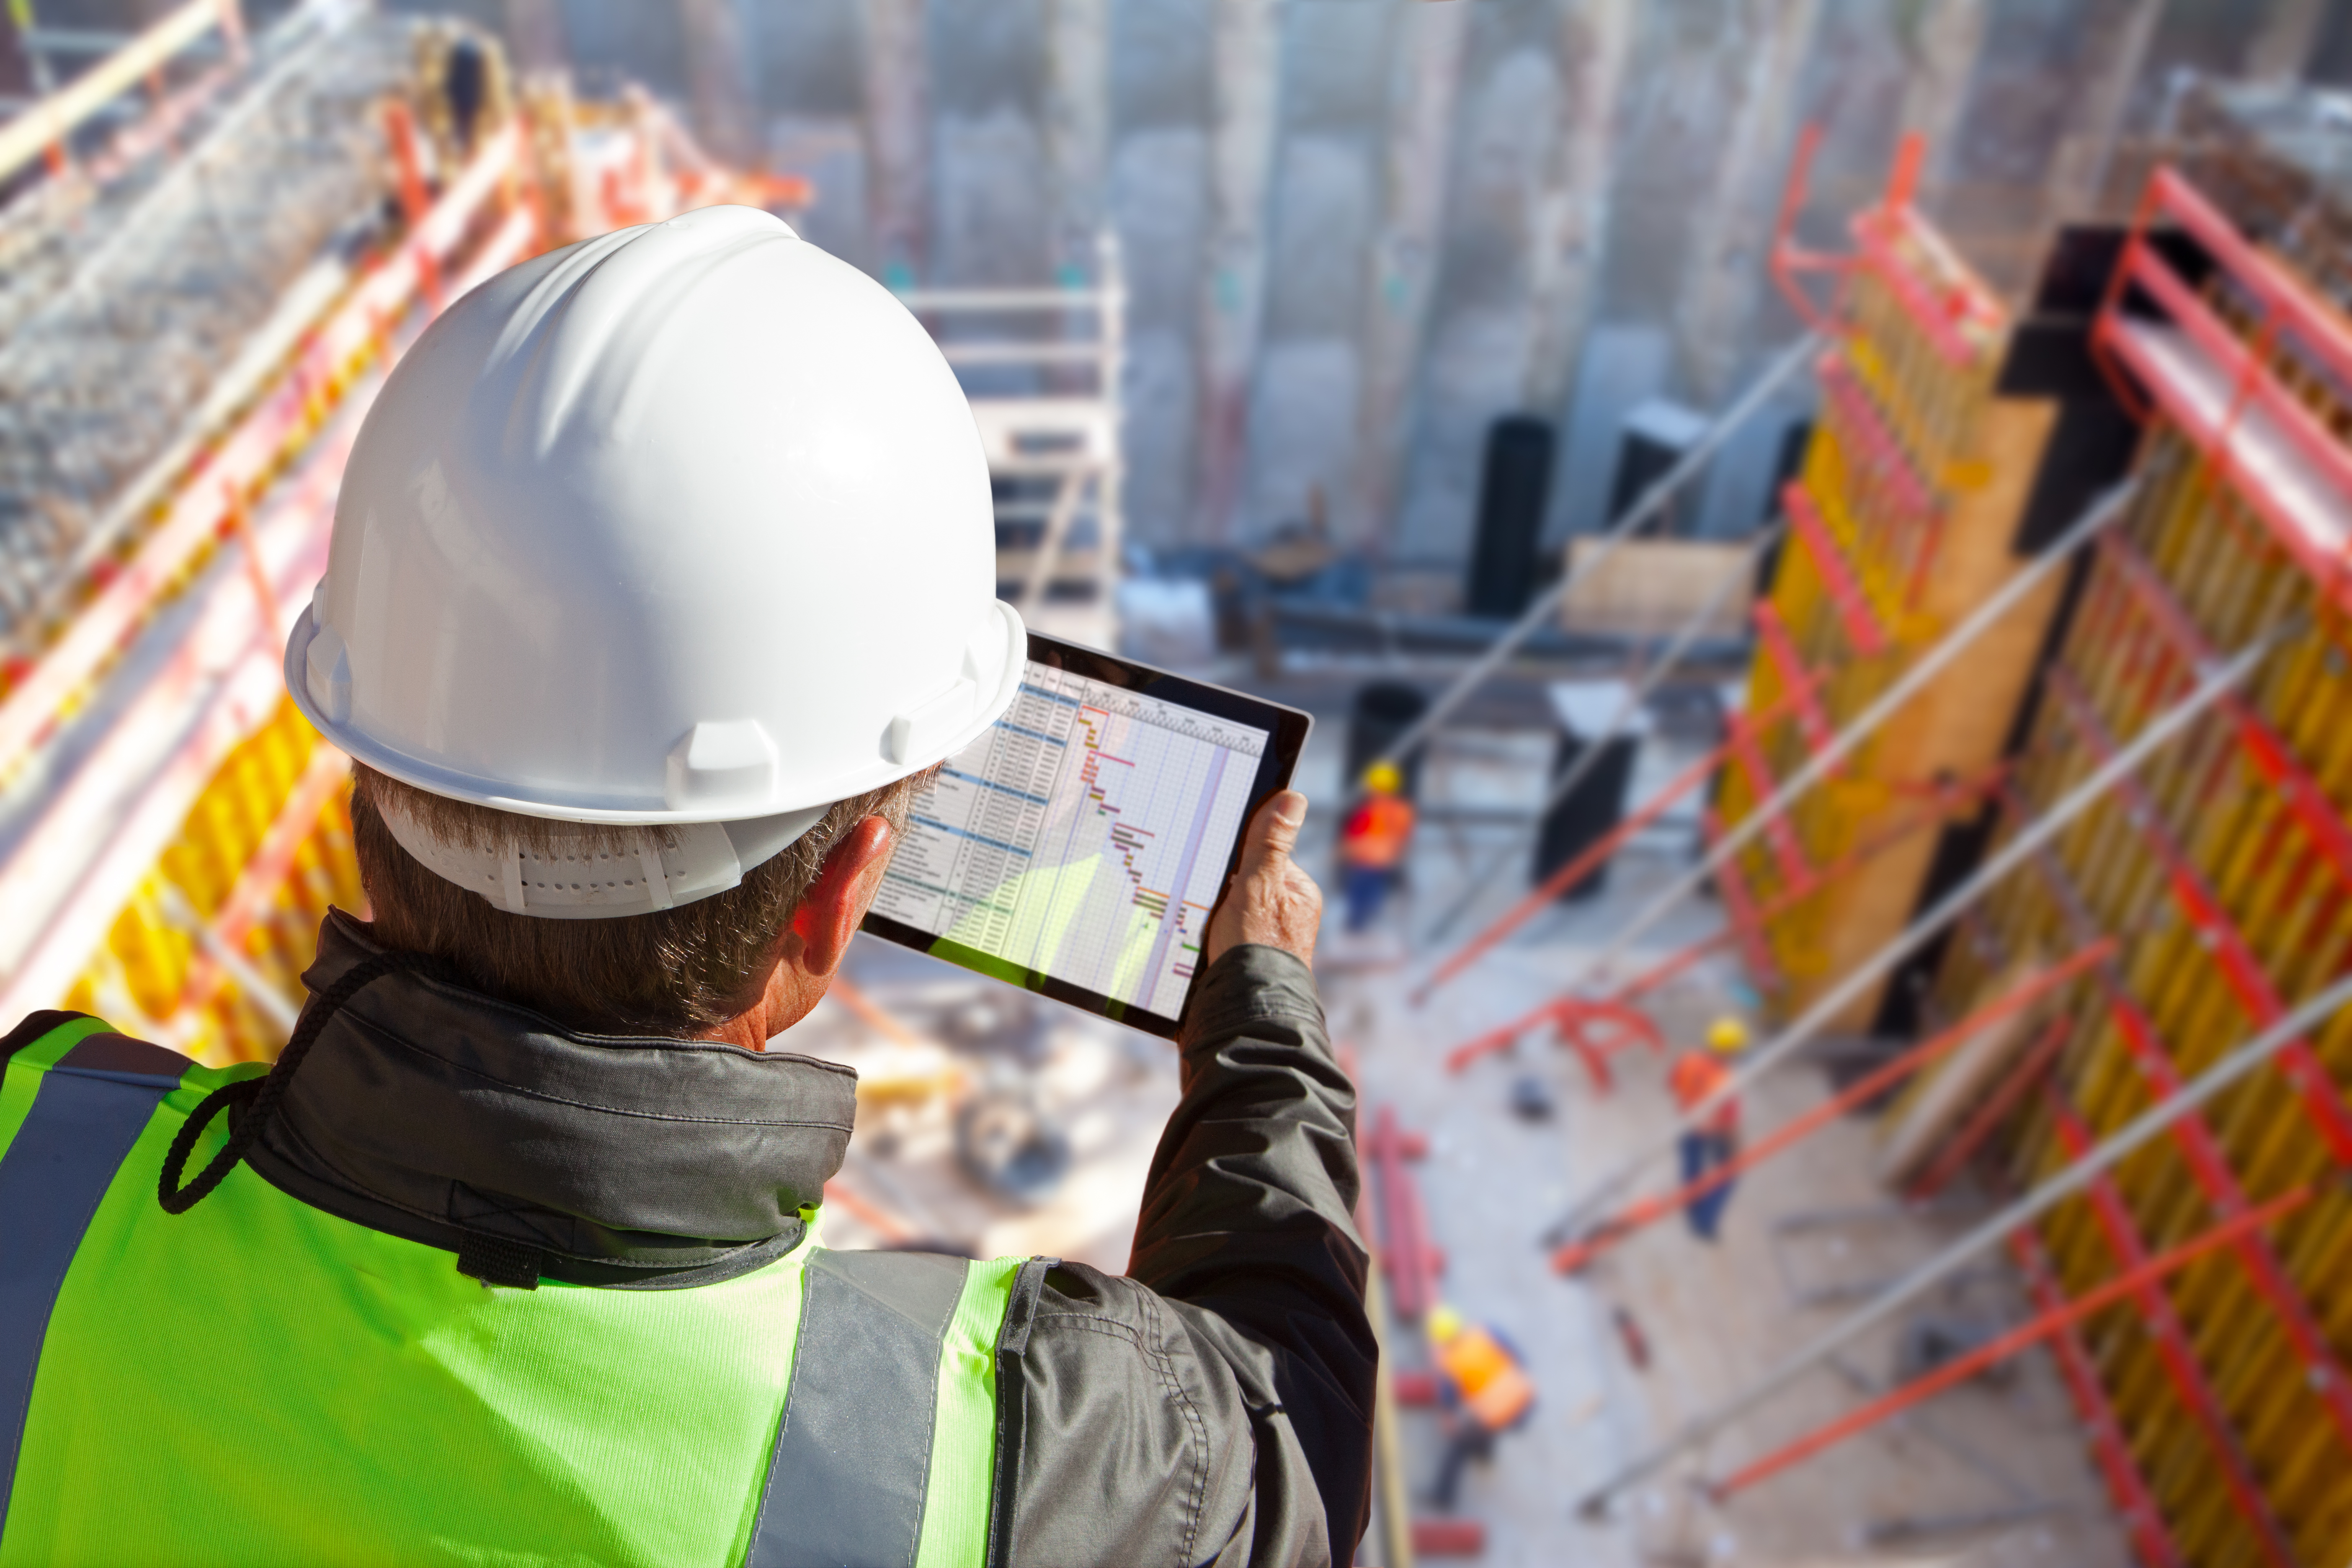 Register Now for the "Advanced Technologies in Construction" Conference